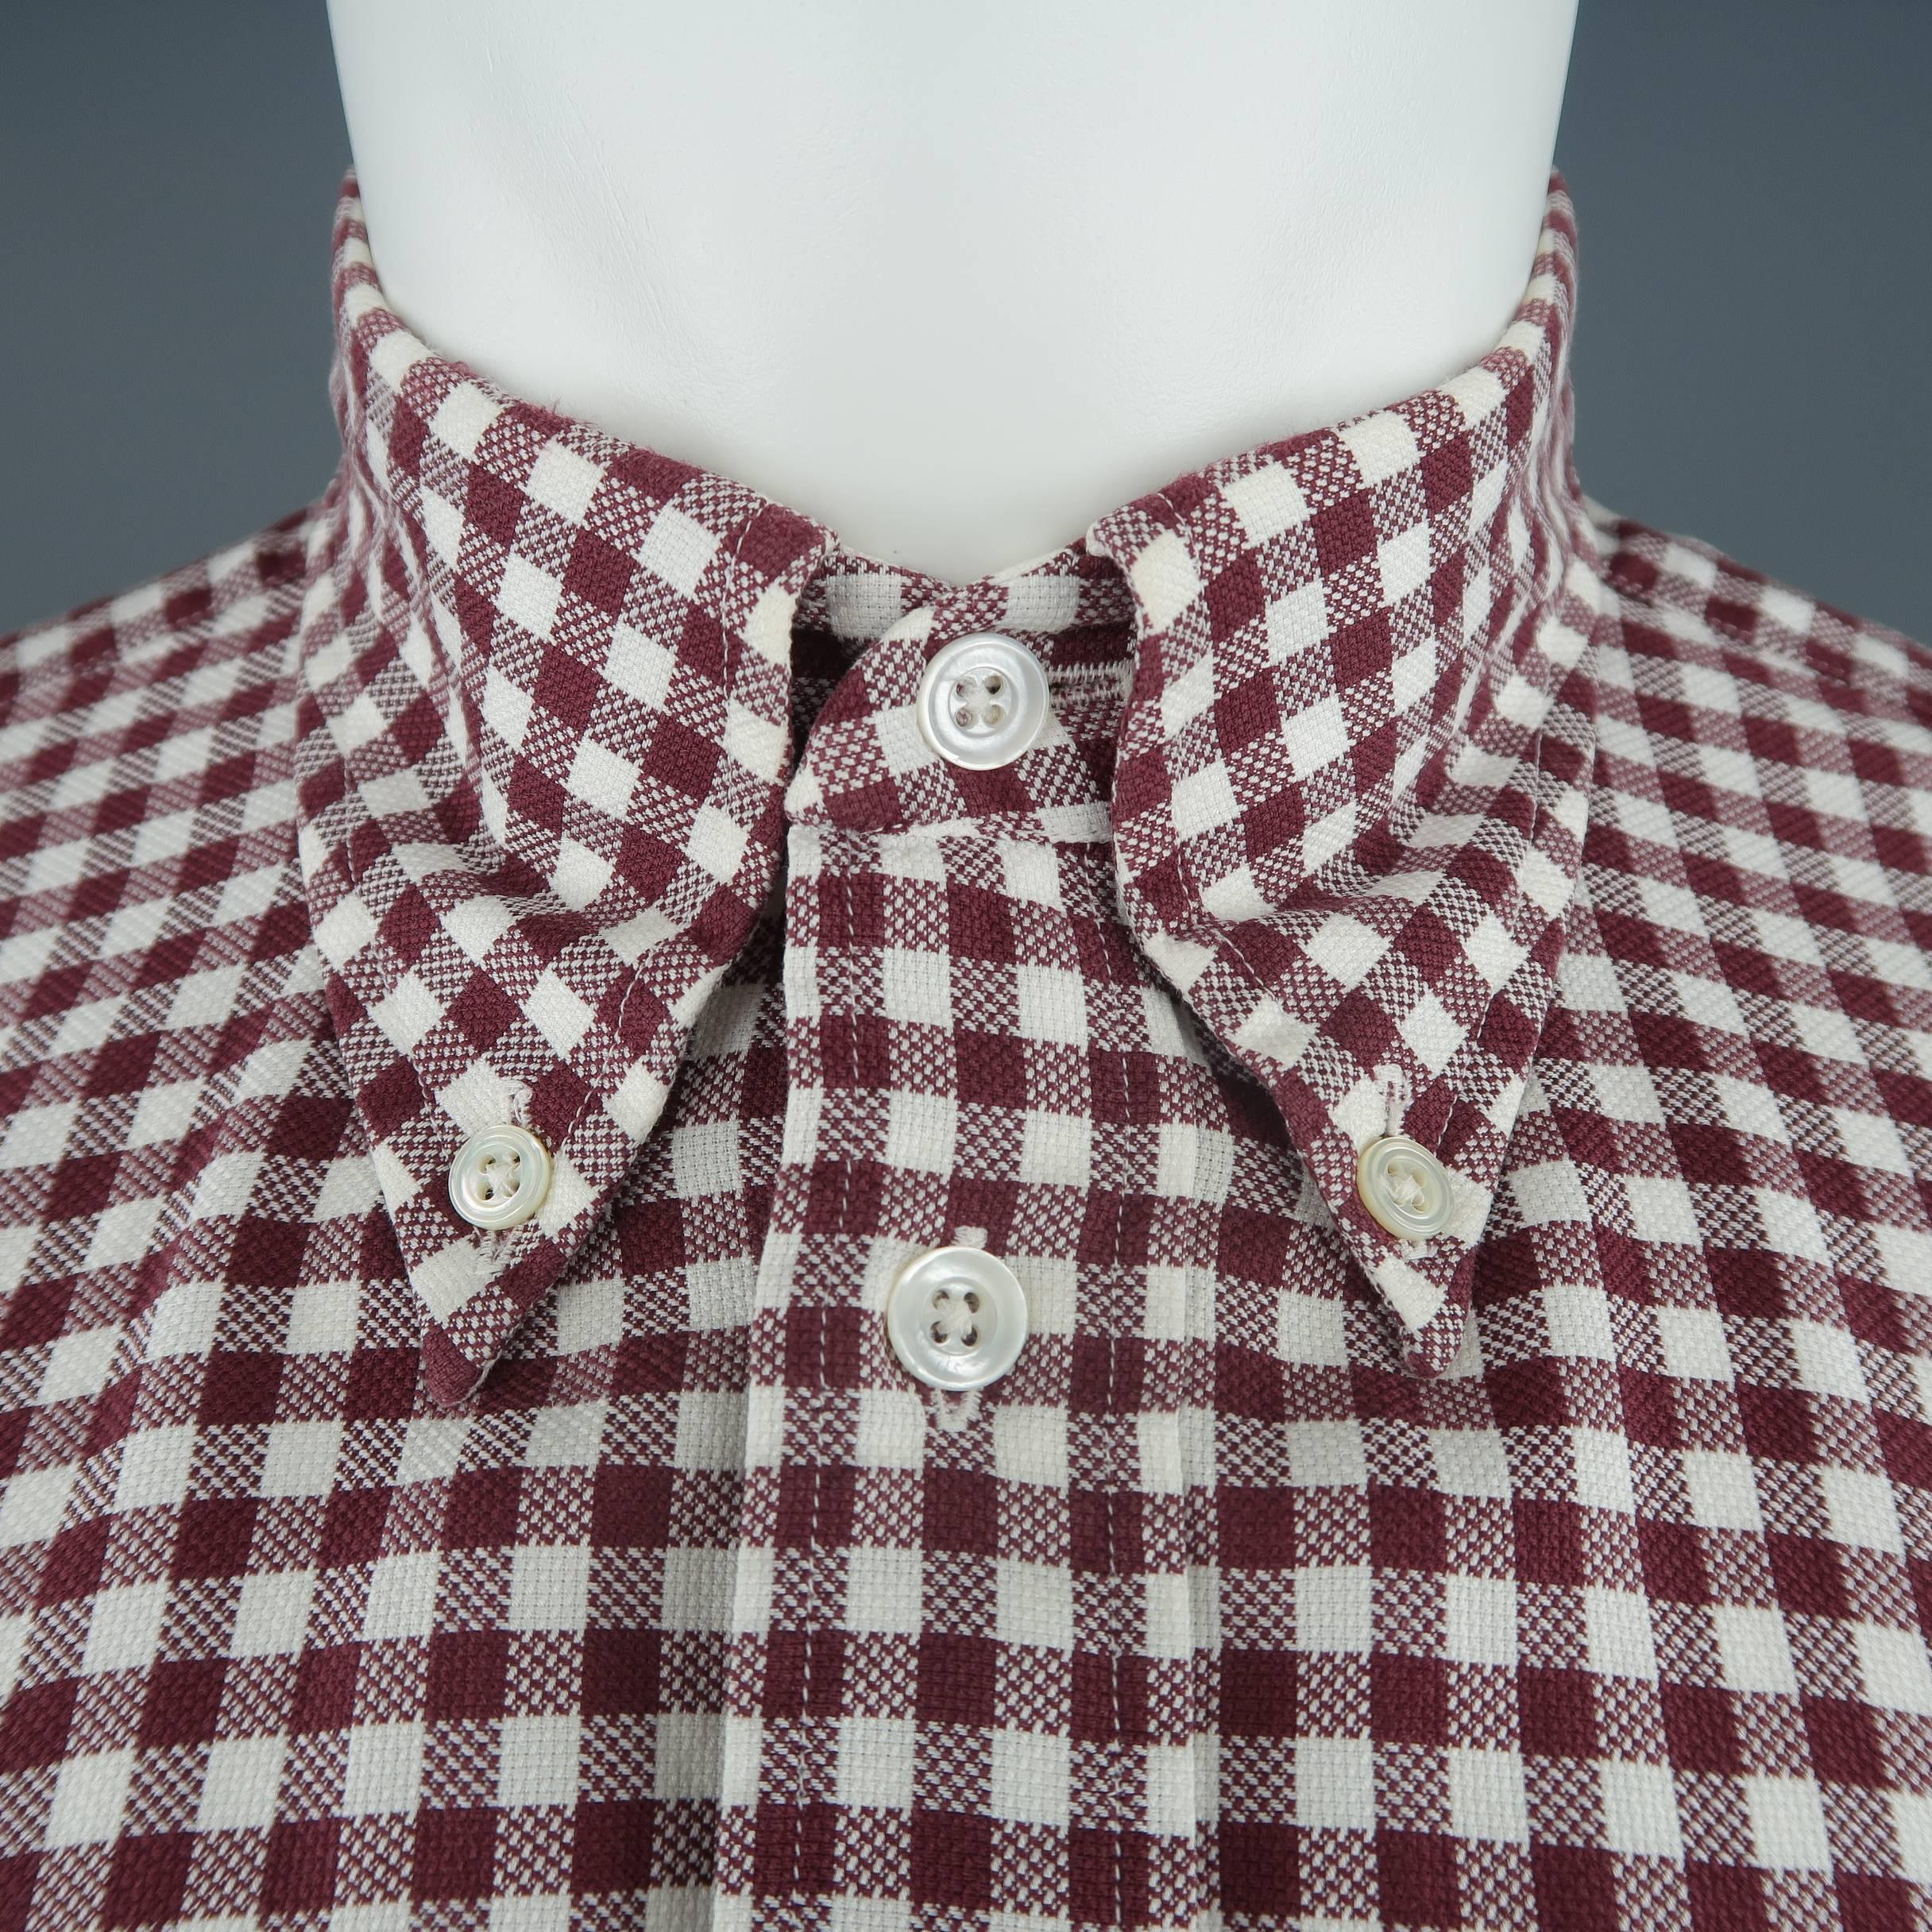 Vintage HERMES shirt comes in burgundy and white gingham plaid cotton with a pointed button down collar and breast patch pocket. Made in France.
 
Excellent Pre-Owned Condition.
Marked: 40 / 15 3/4
 
Measurements:
 
Shoulder: 17 in.
Chest: 42